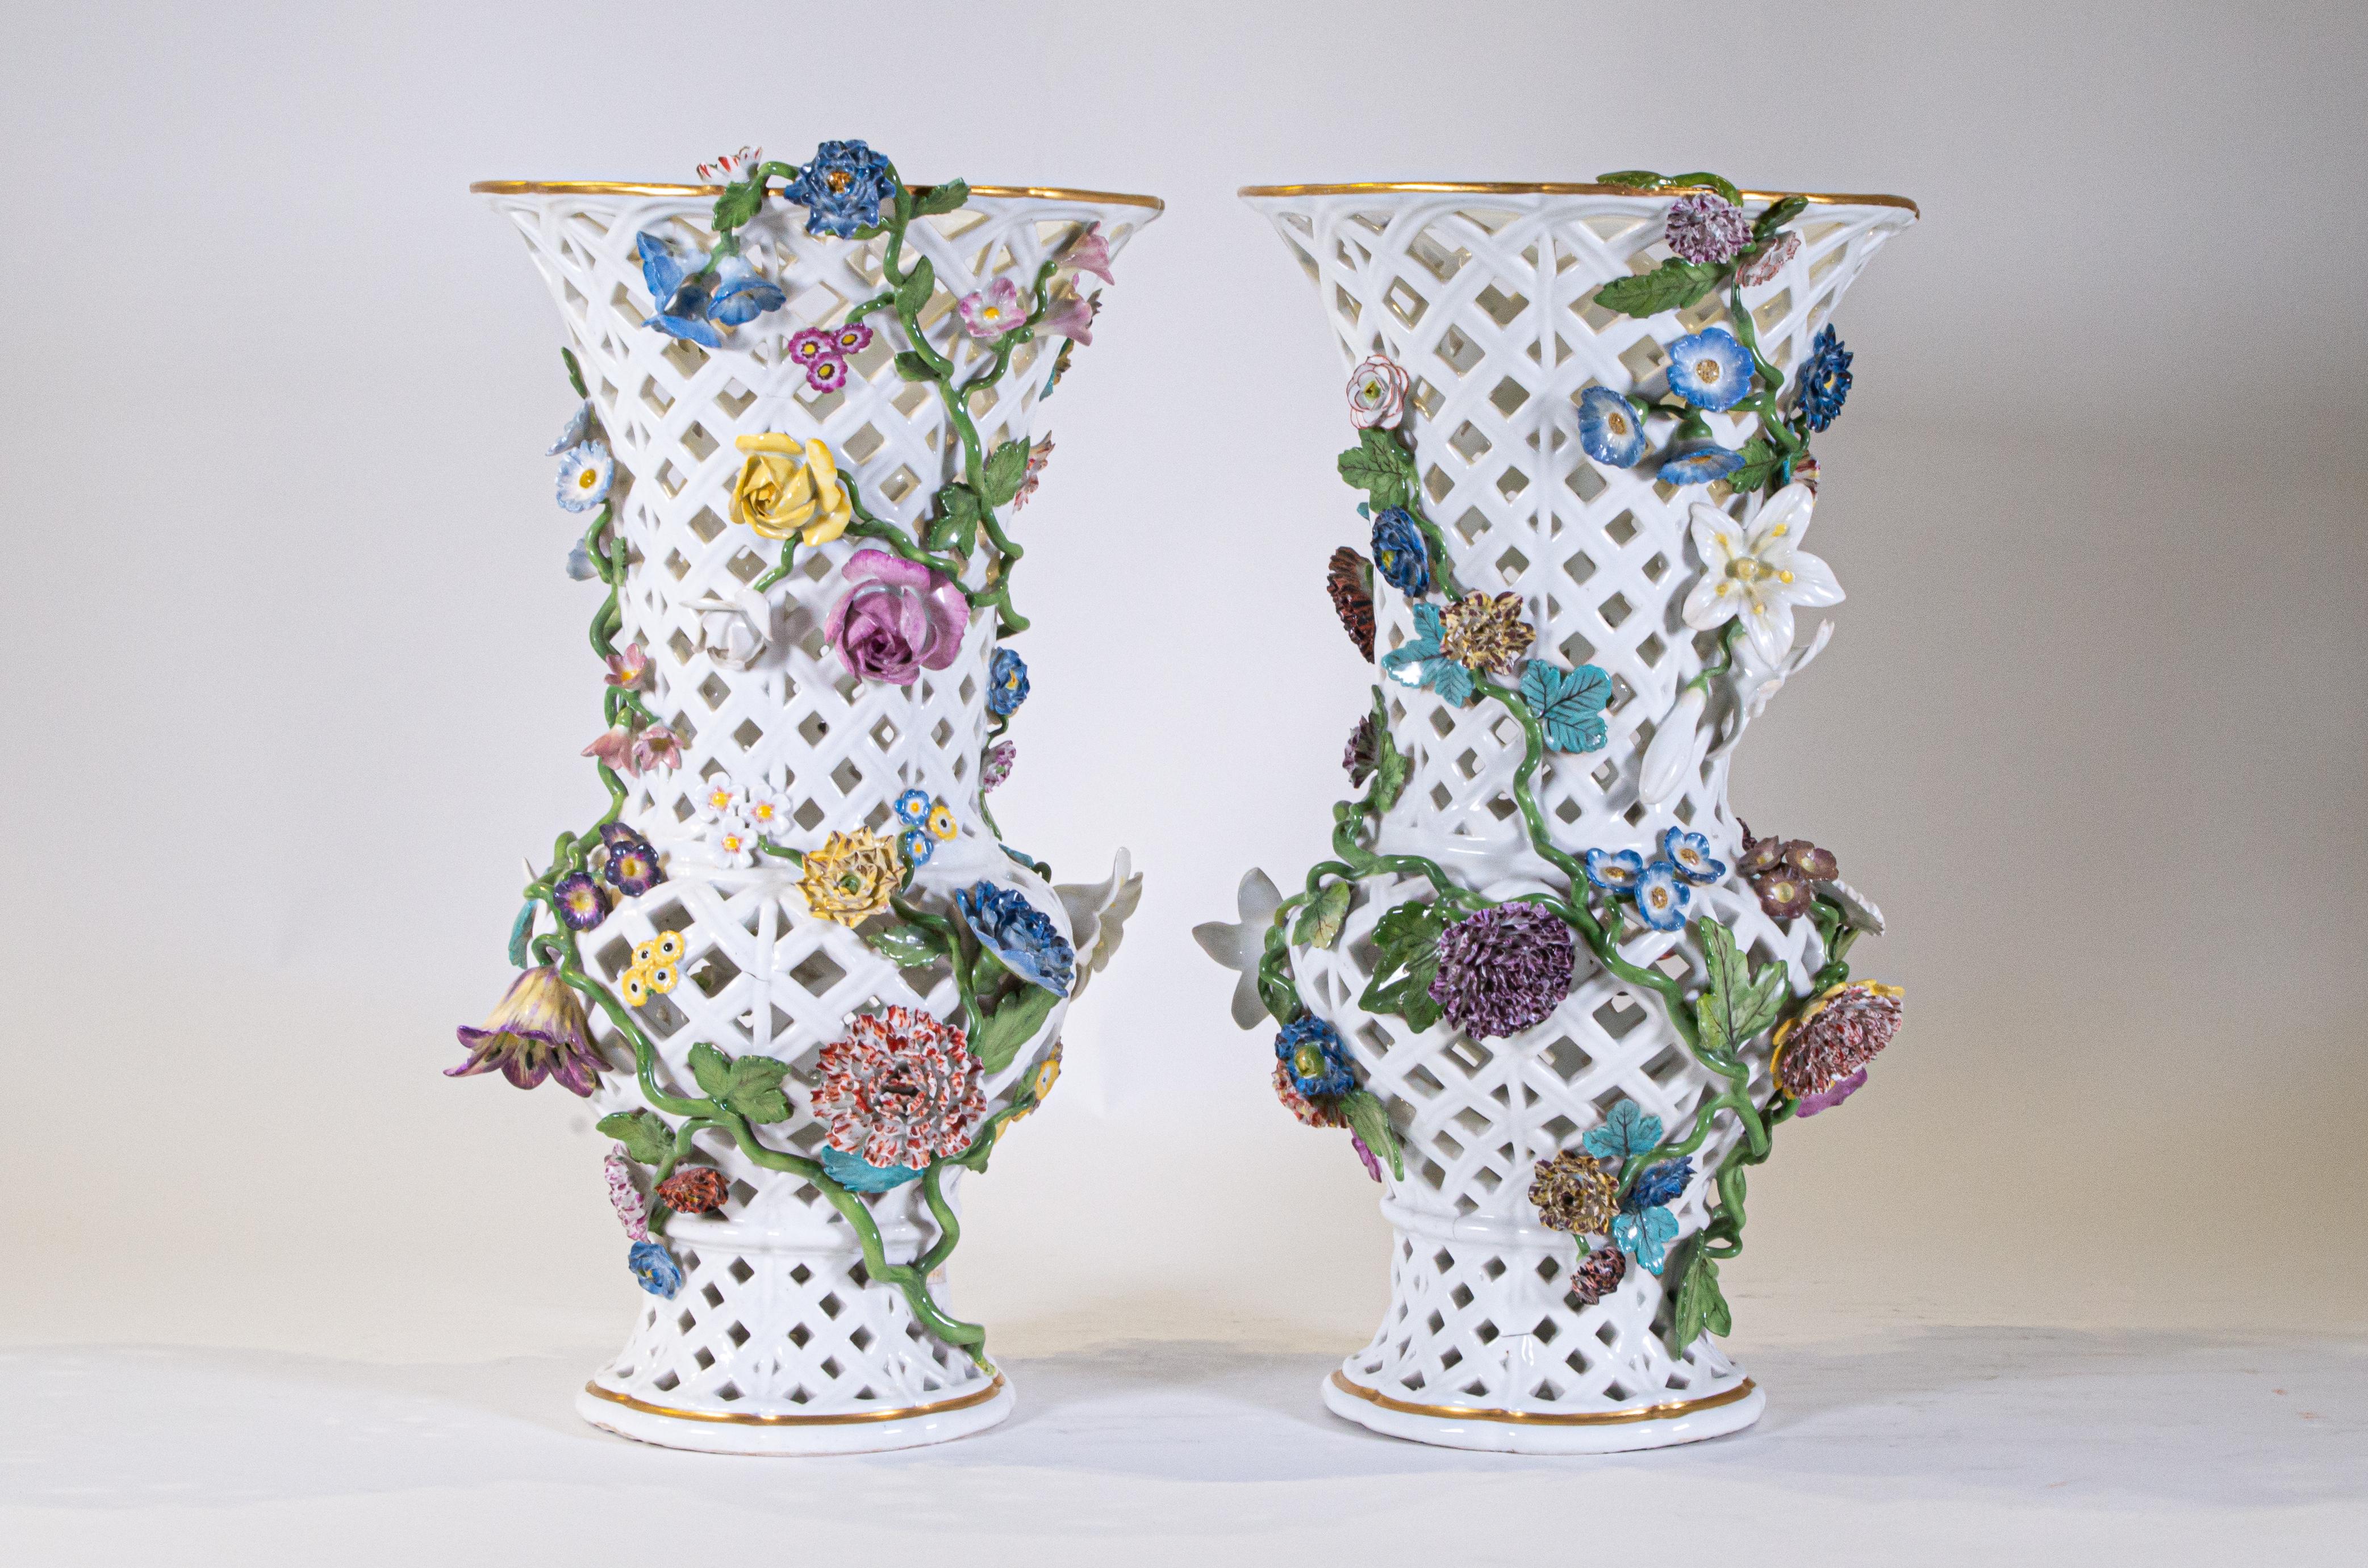 A Highly Important pair of Museum Quality Louis XV Period 18th century Meissen Porcelain filigree openwork vases with a medially of flowers and vined leaves. This is truly an exceptional pair of Meissen Porcelain vases with a truly gorgeous design